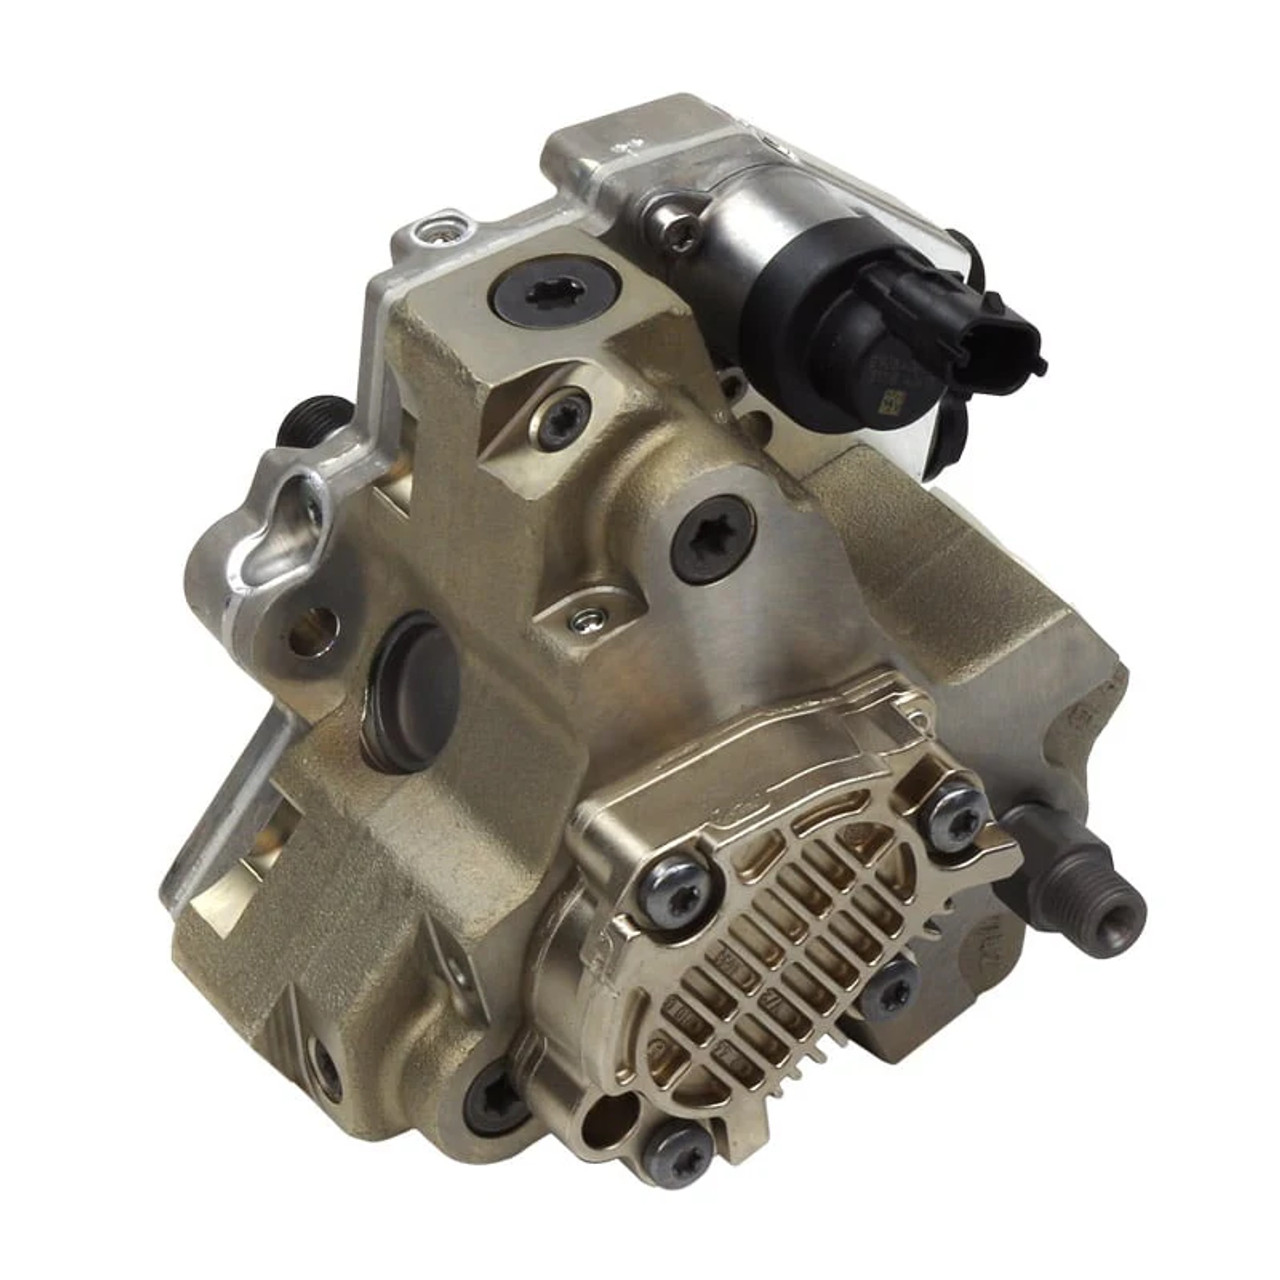  Industrial Injections Brand NEW Stock CP3 Pump for 2007.5 to 2010 LBZ And LMM 6.6L Duramax (0445020105-IIS)Other View